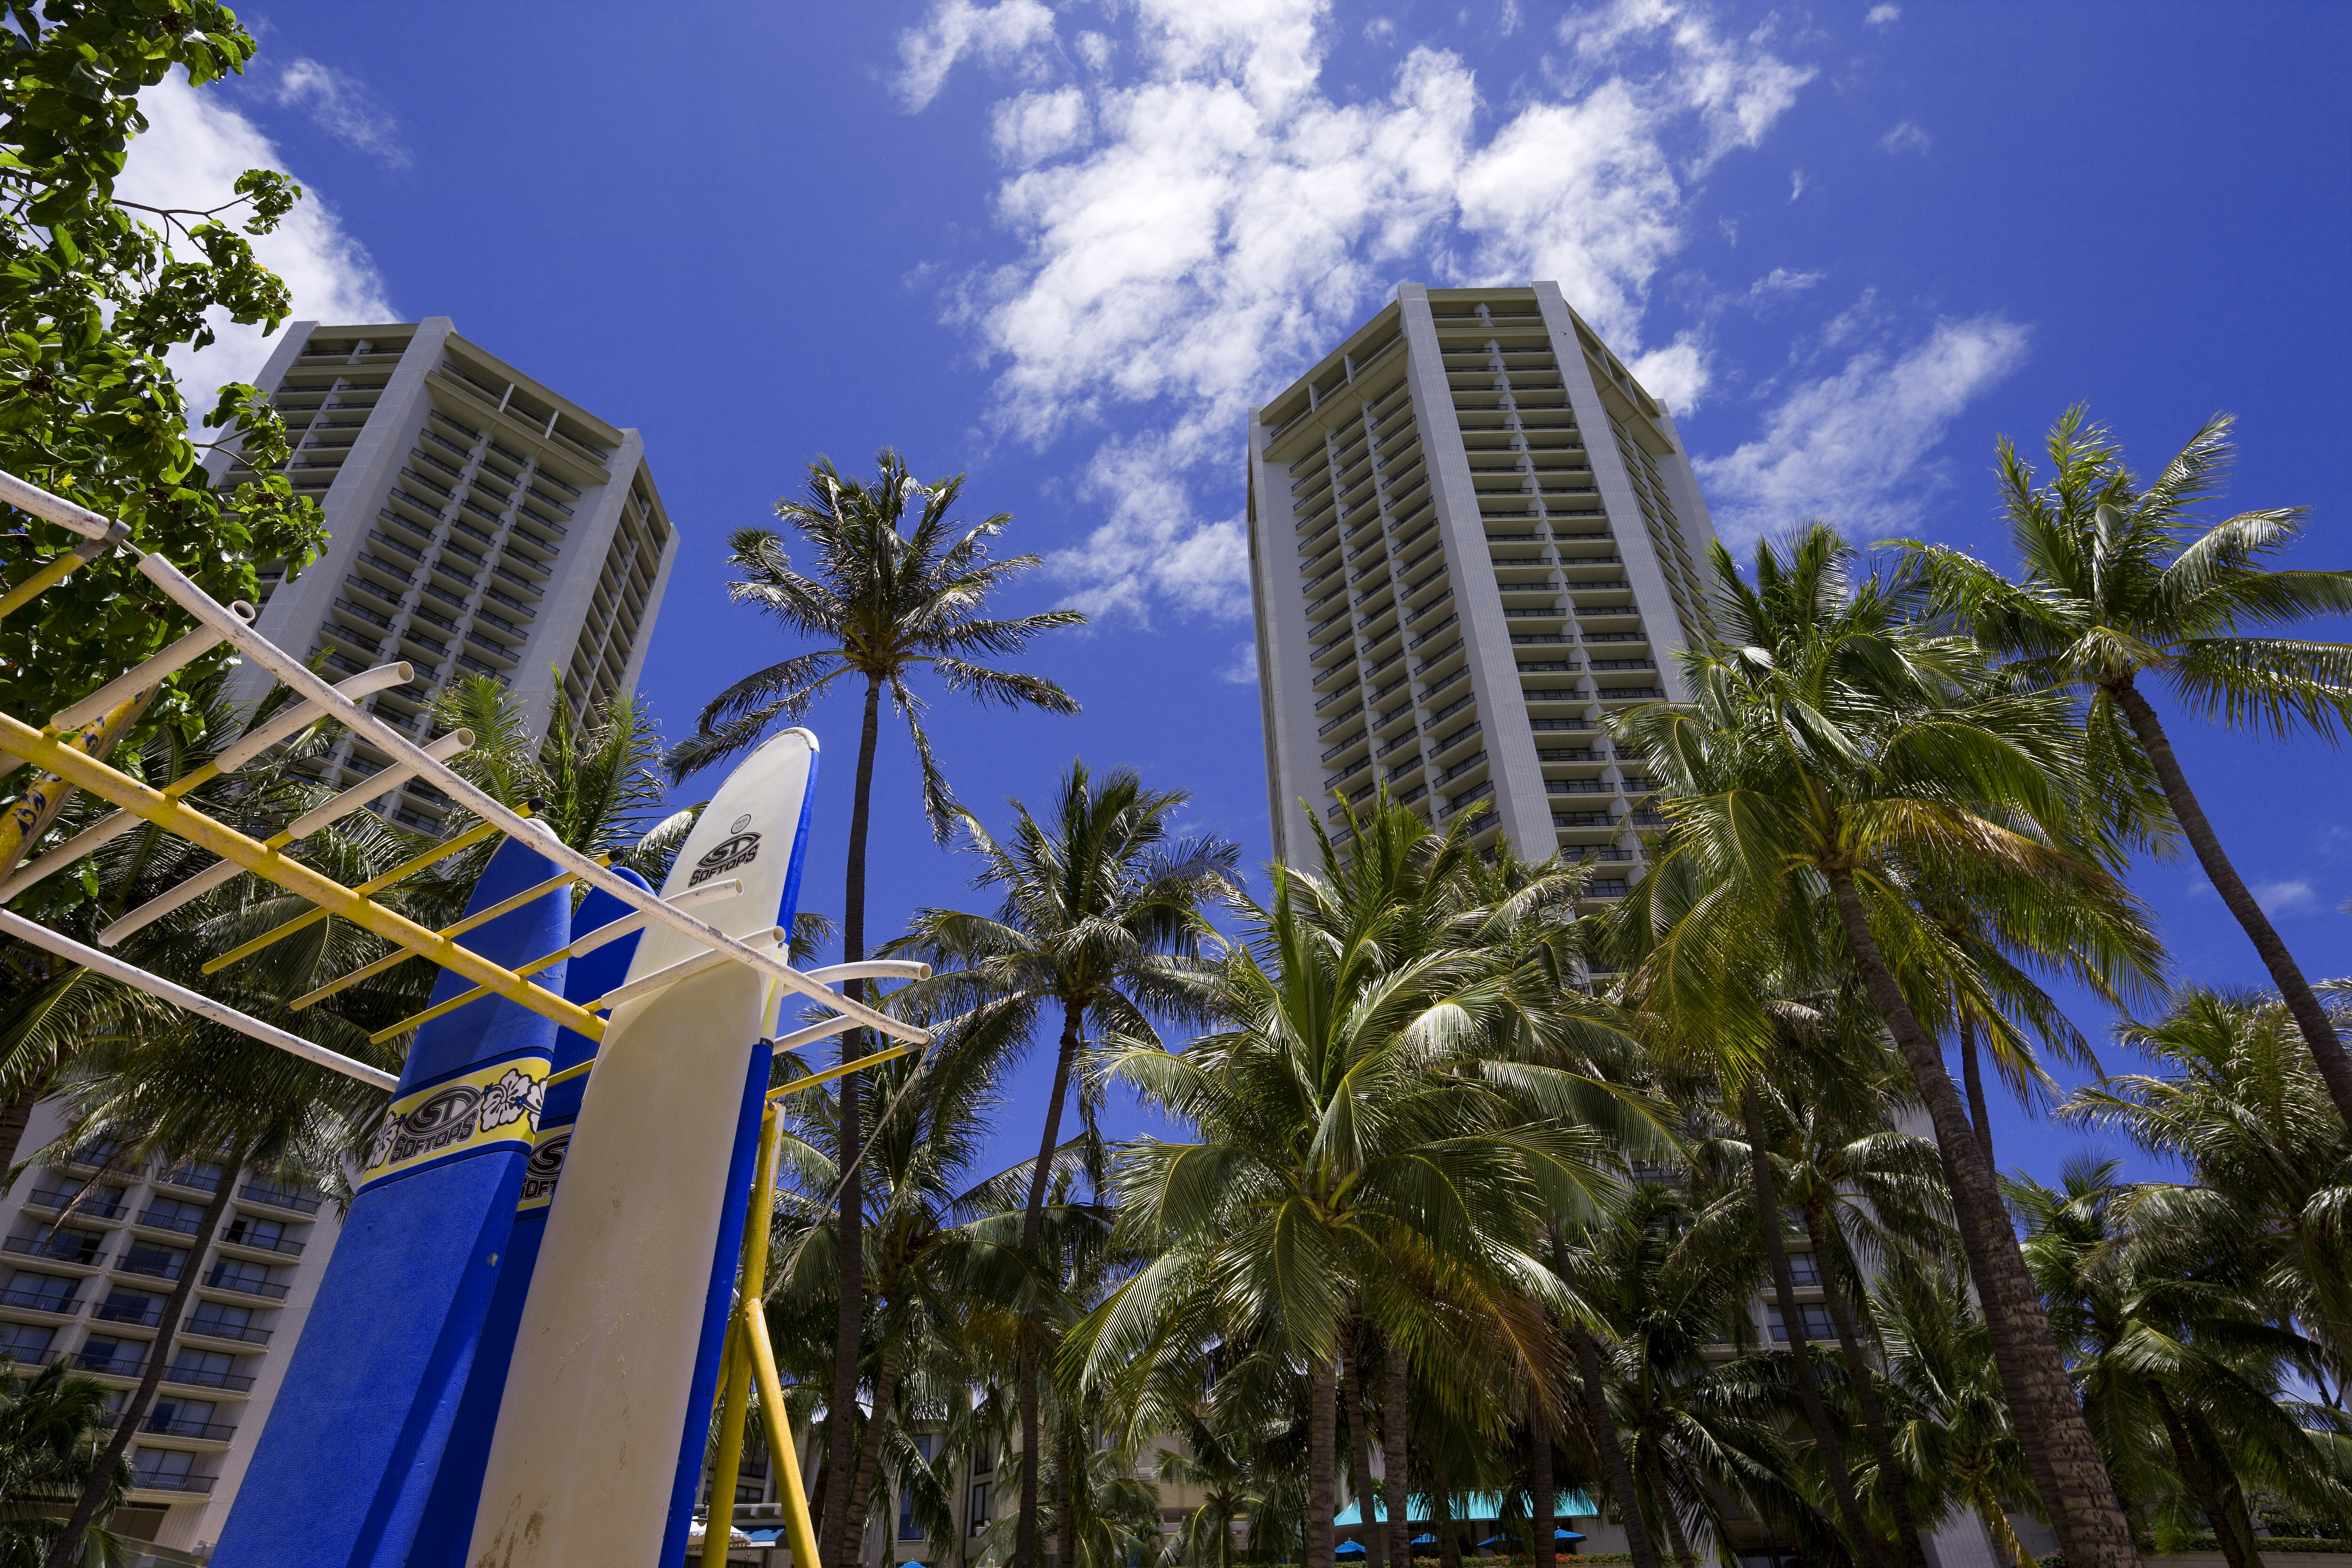 photo,material,free,landscape,picture,stock photo,Creative Commons,Waikiki hotel, beach, surfboard, blue sky, building